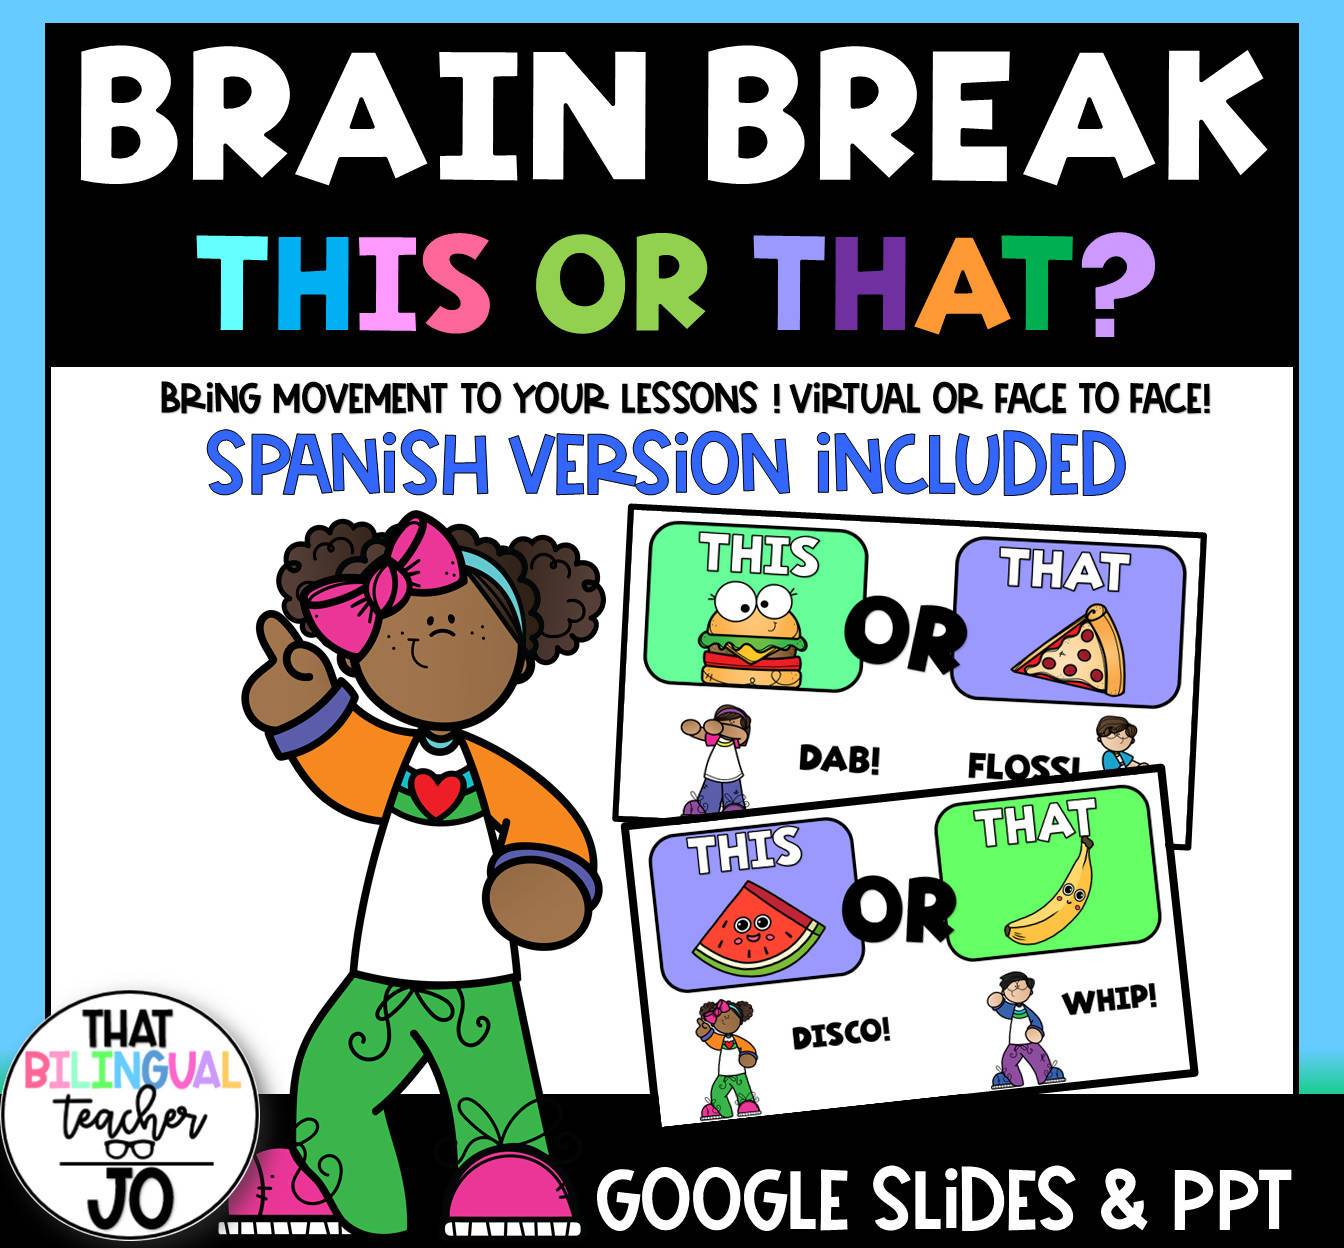 Two and a Crayon: The Hottest New Brain Break